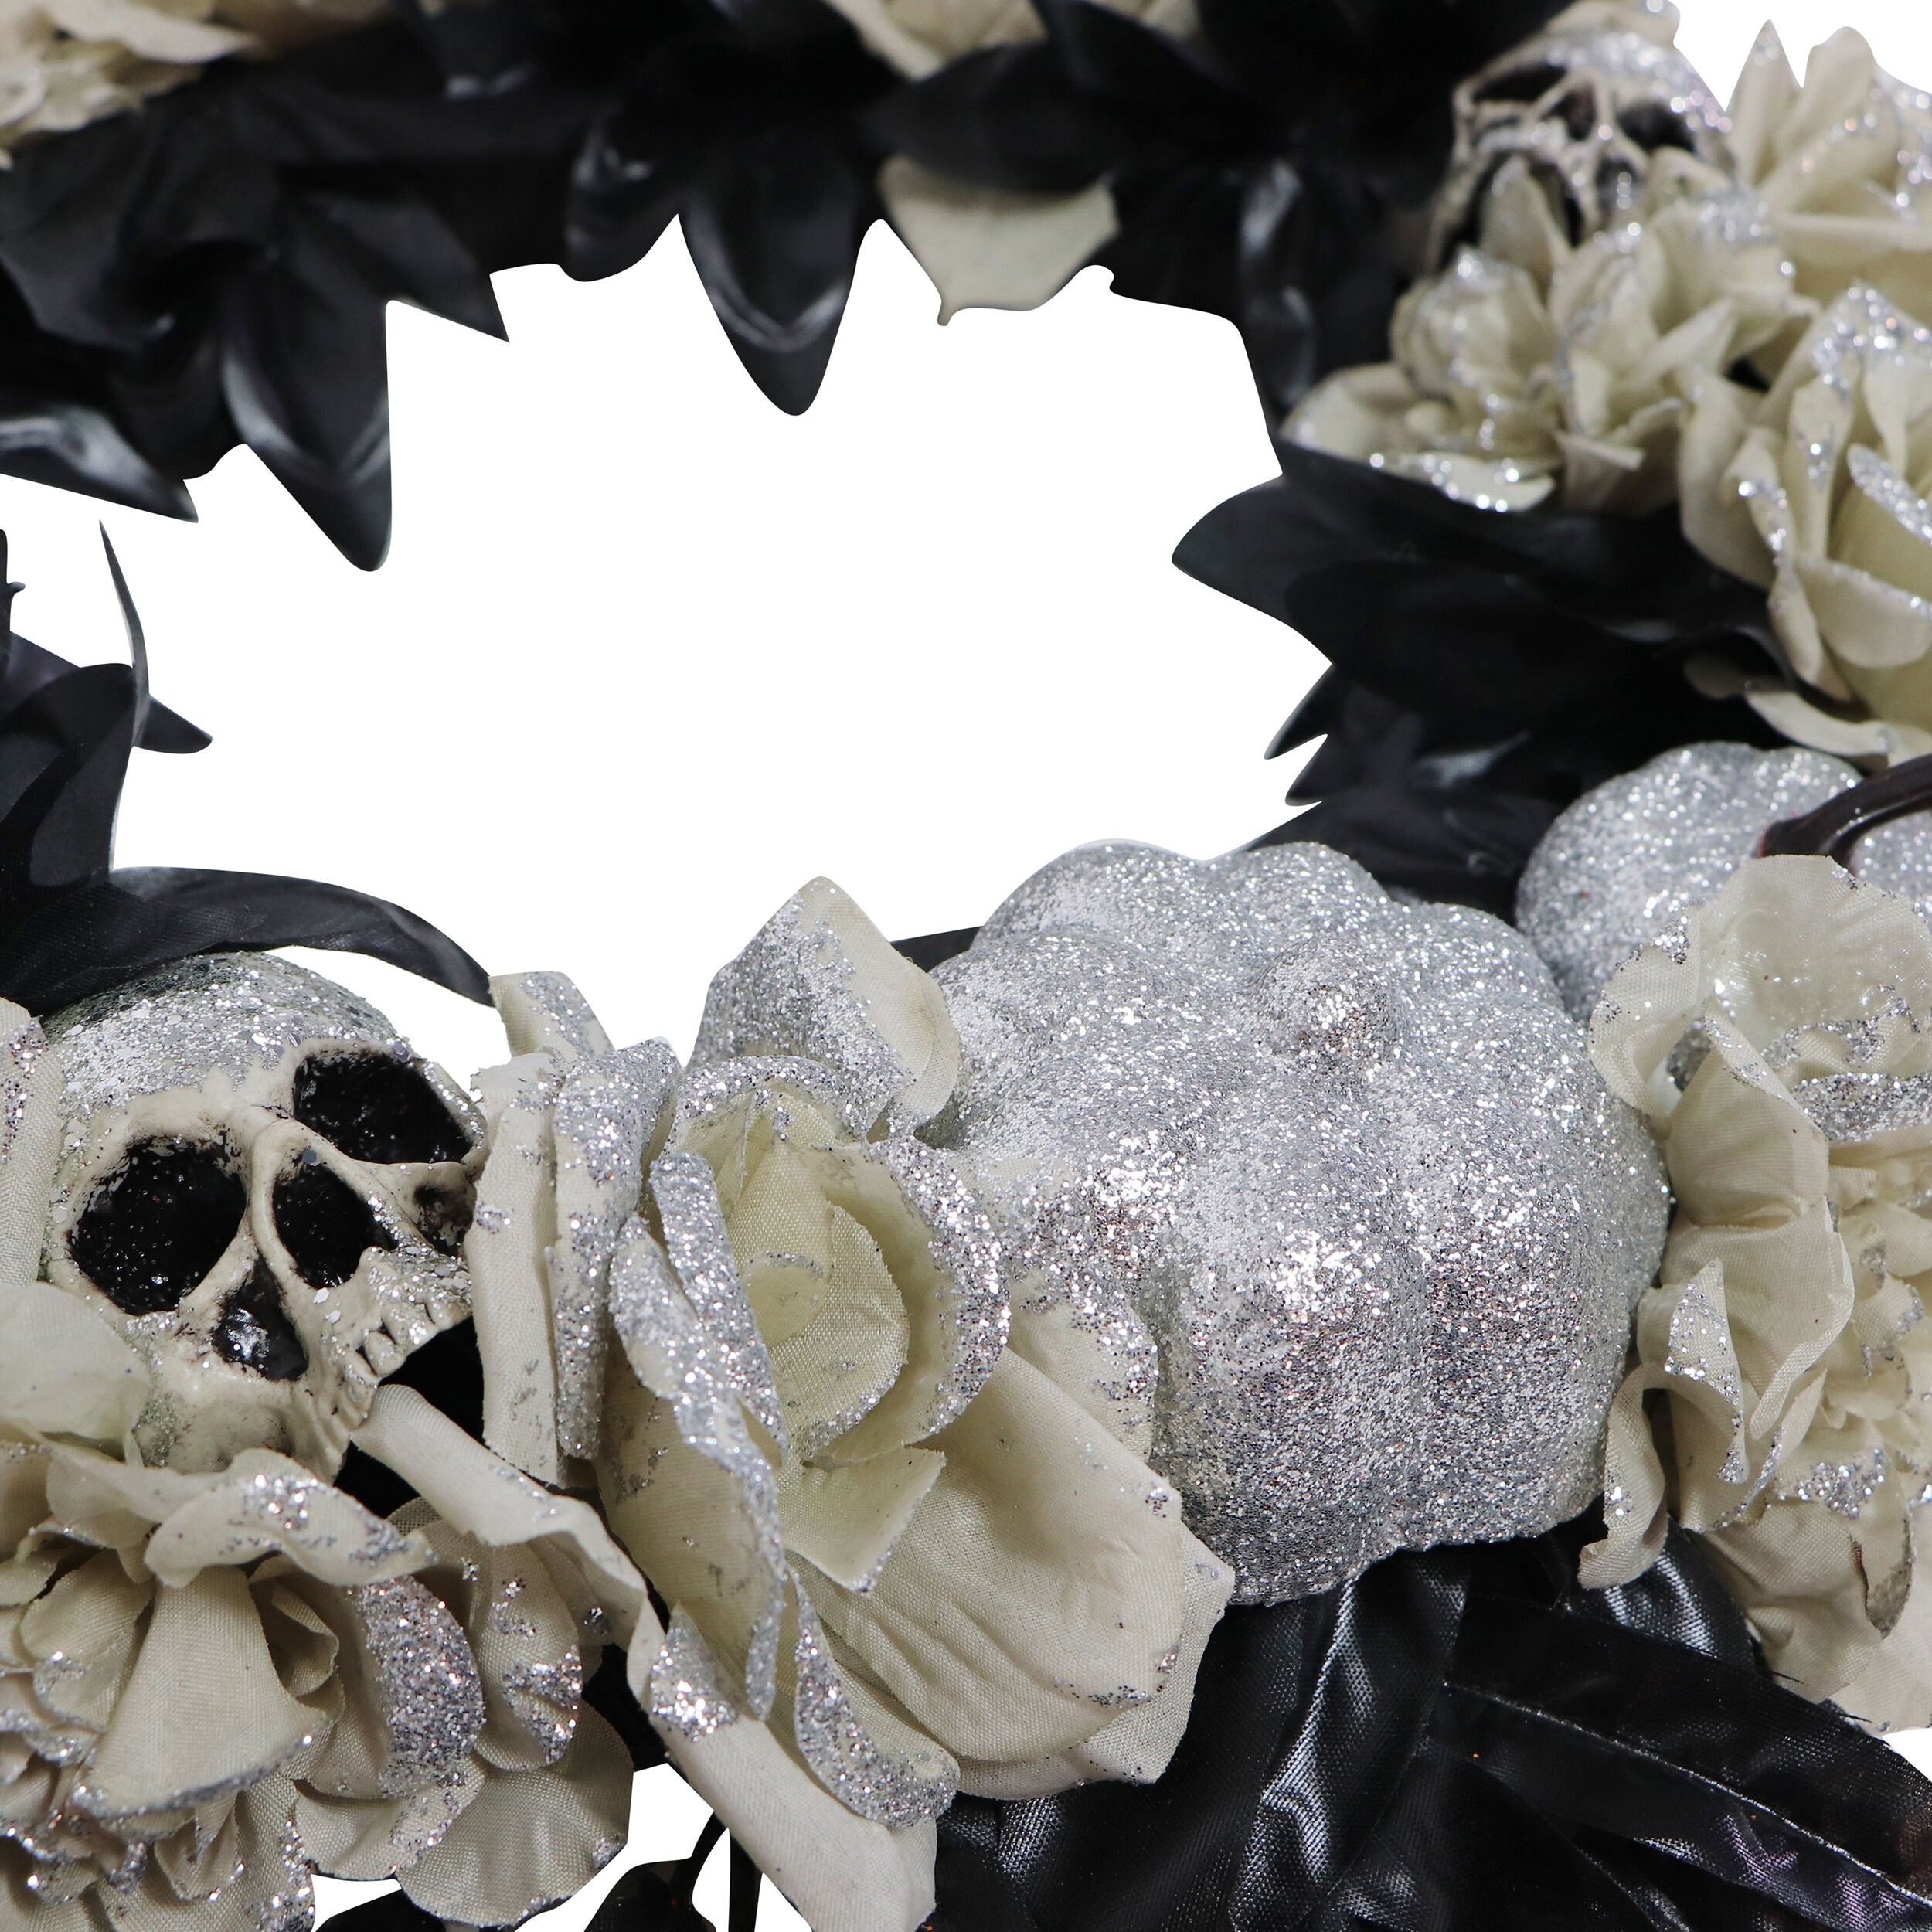 Haunted Hill Farm -  15-In. Halloween Black and Silver Floral Wreath with Glitter Pumpkins and Skulls for Haunted House Hanging Decoration